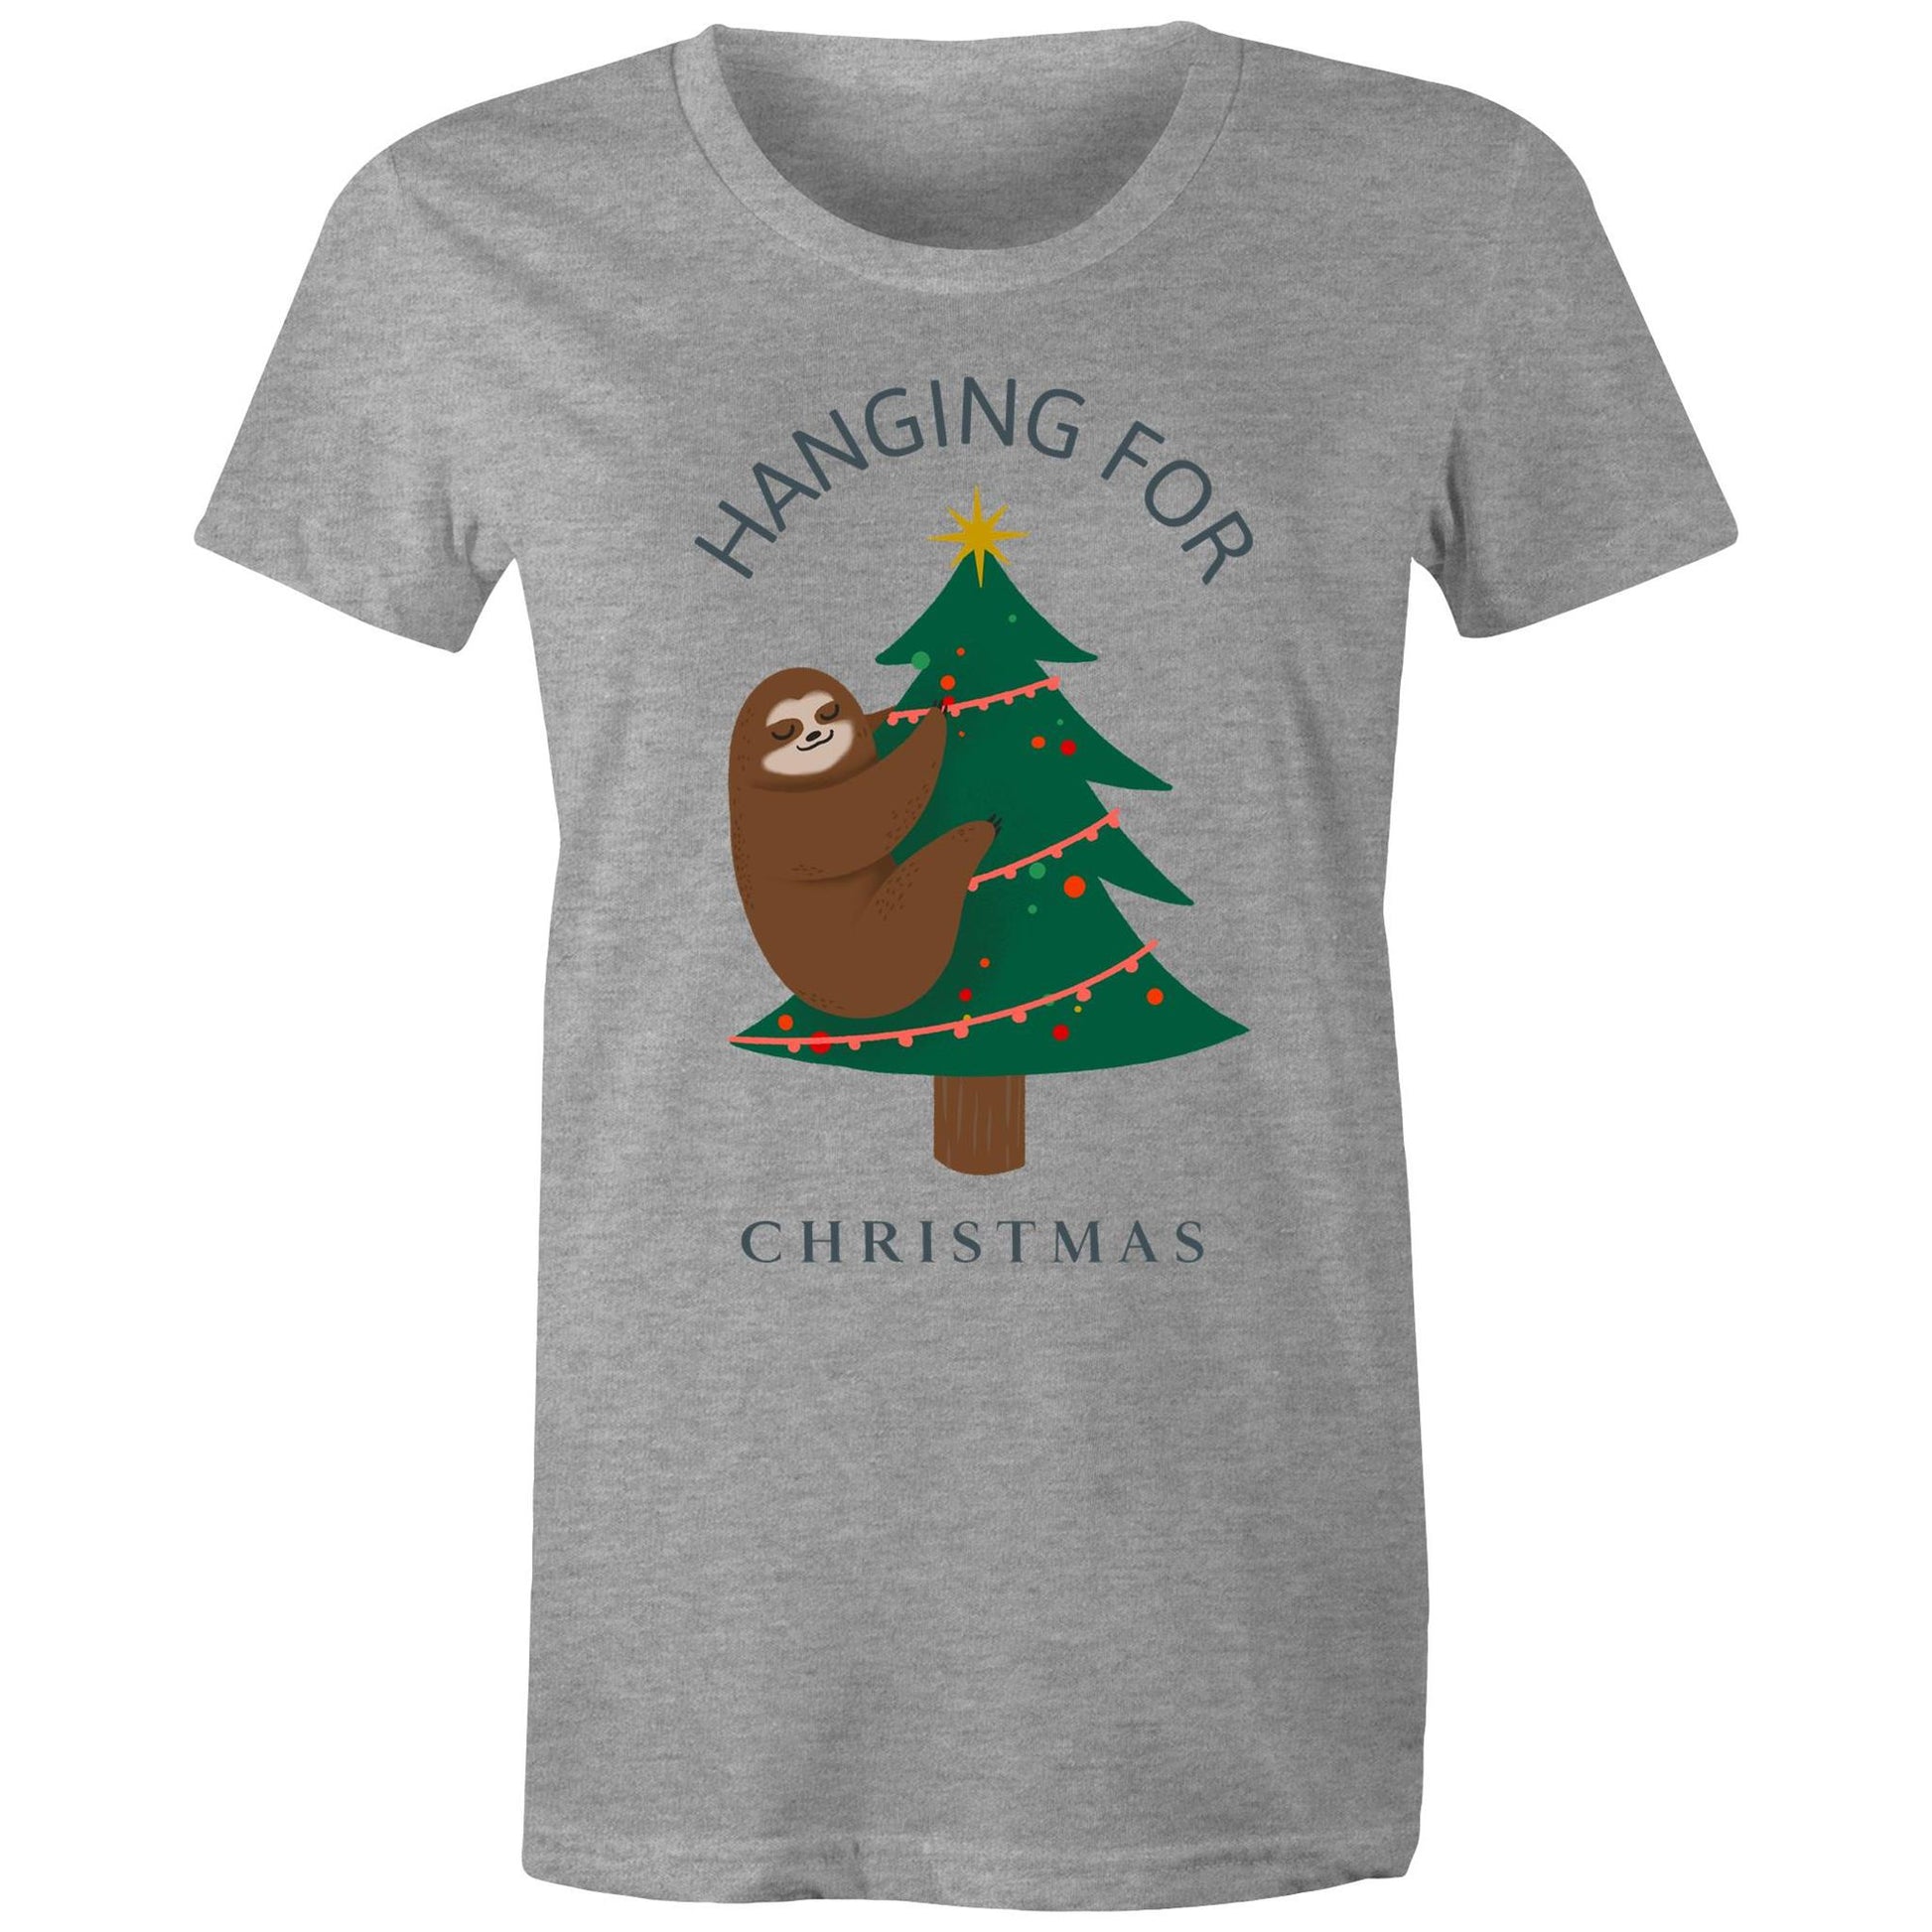 Hanging For Christmas - Womens T-shirt Grey Marle Christmas Womens T-shirt Merry Christmas